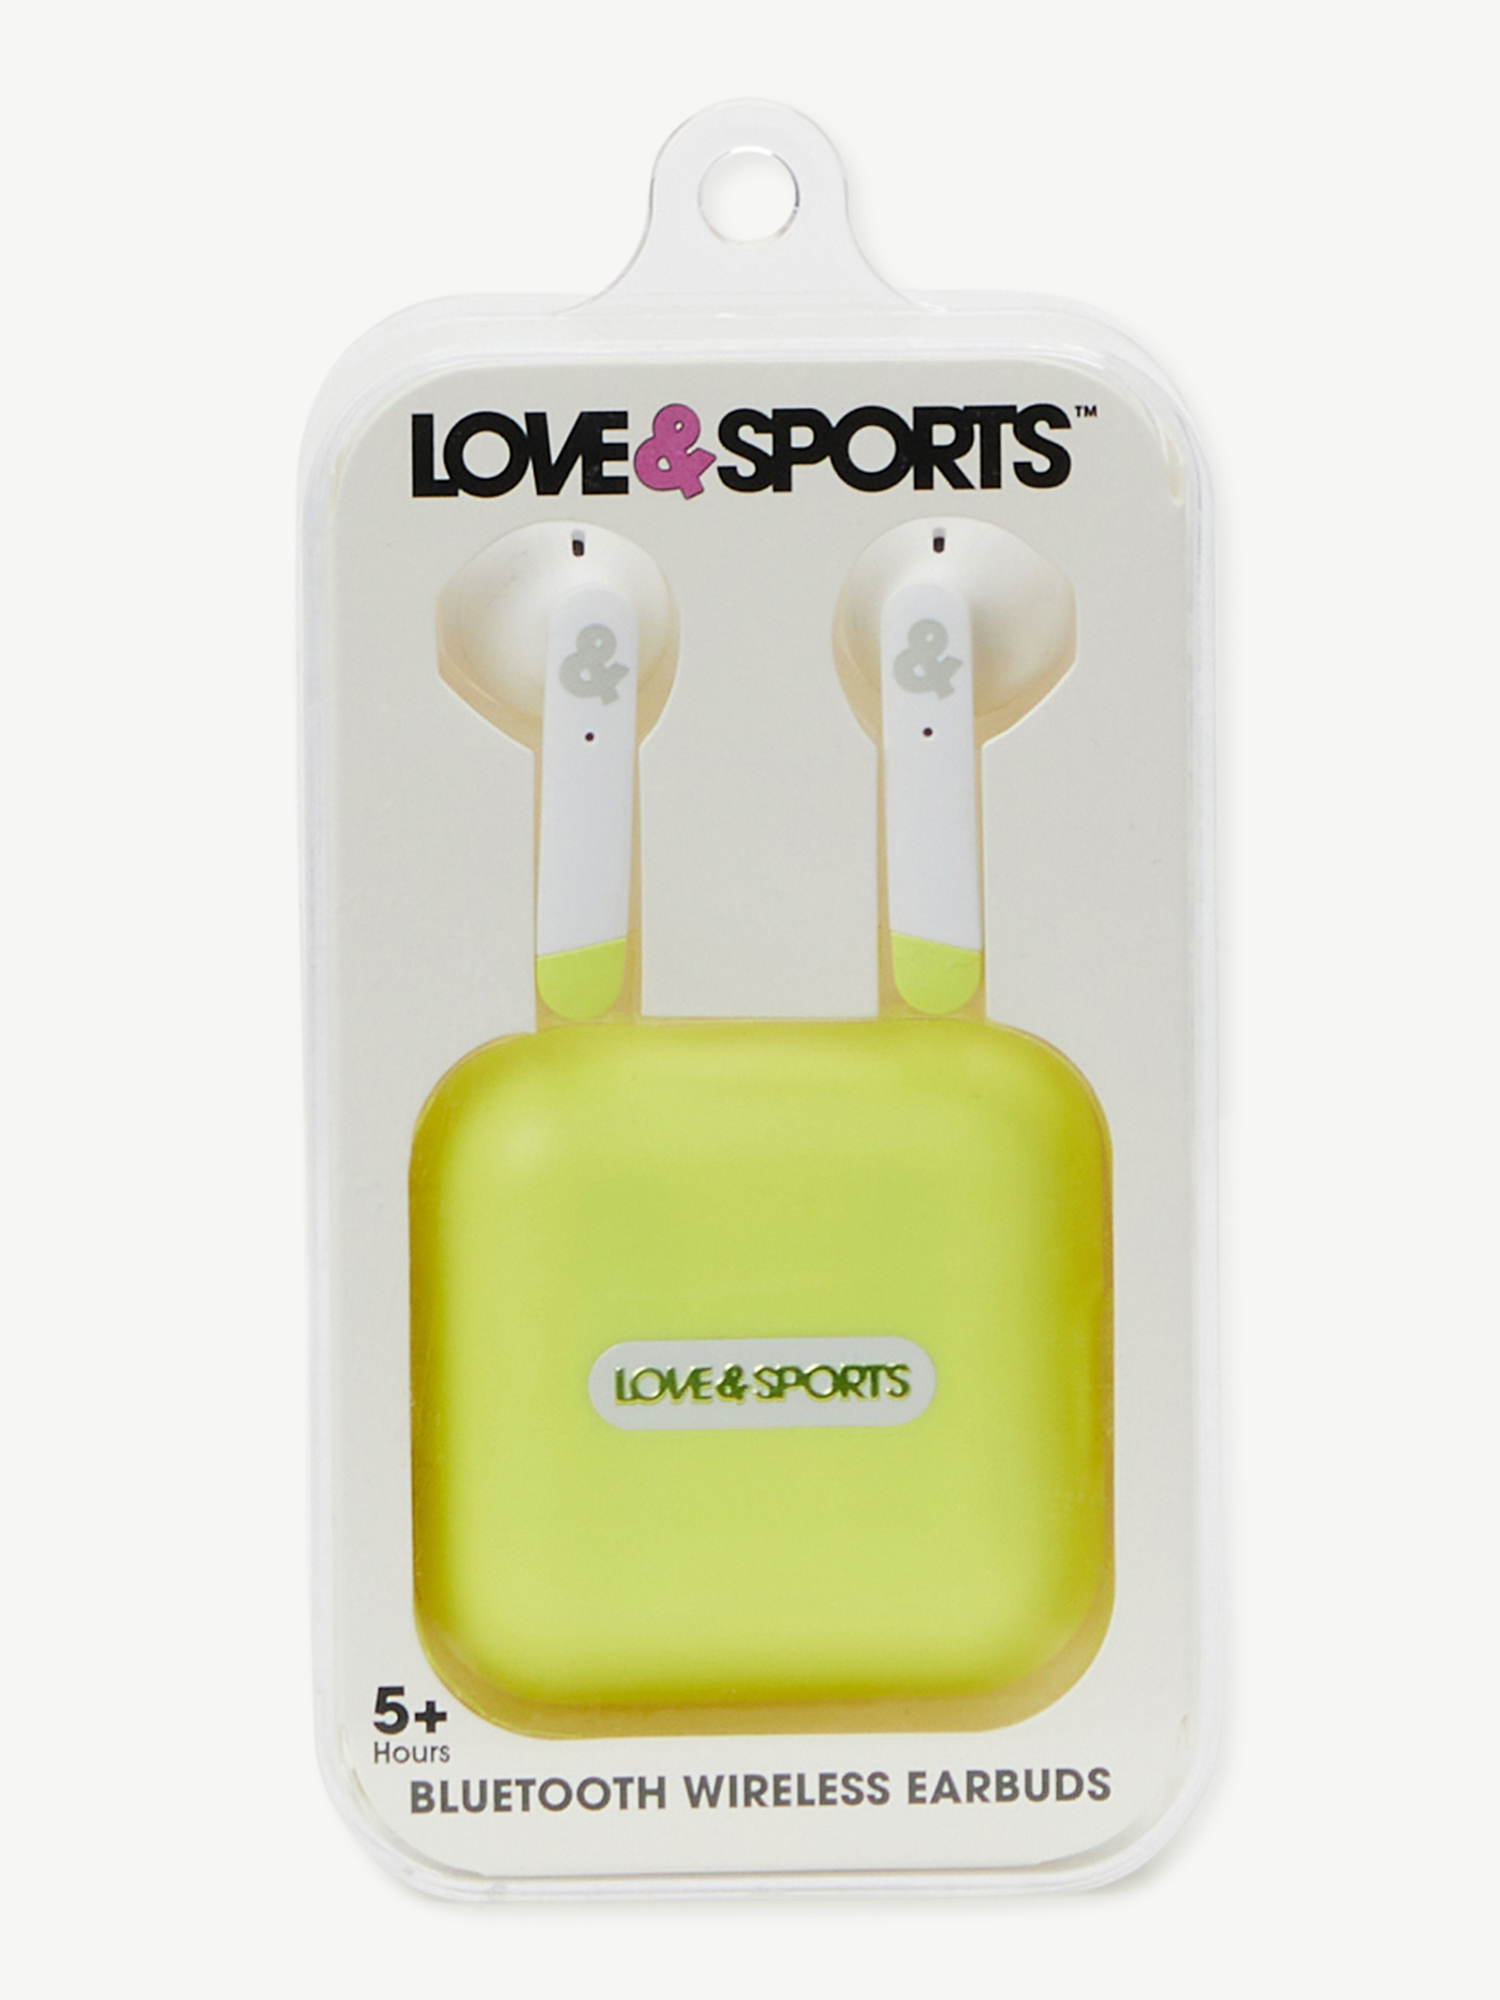 Love & Sports Bluetooth Wireless Earbuds and Charging Case, Neon Lime - image 3 of 5